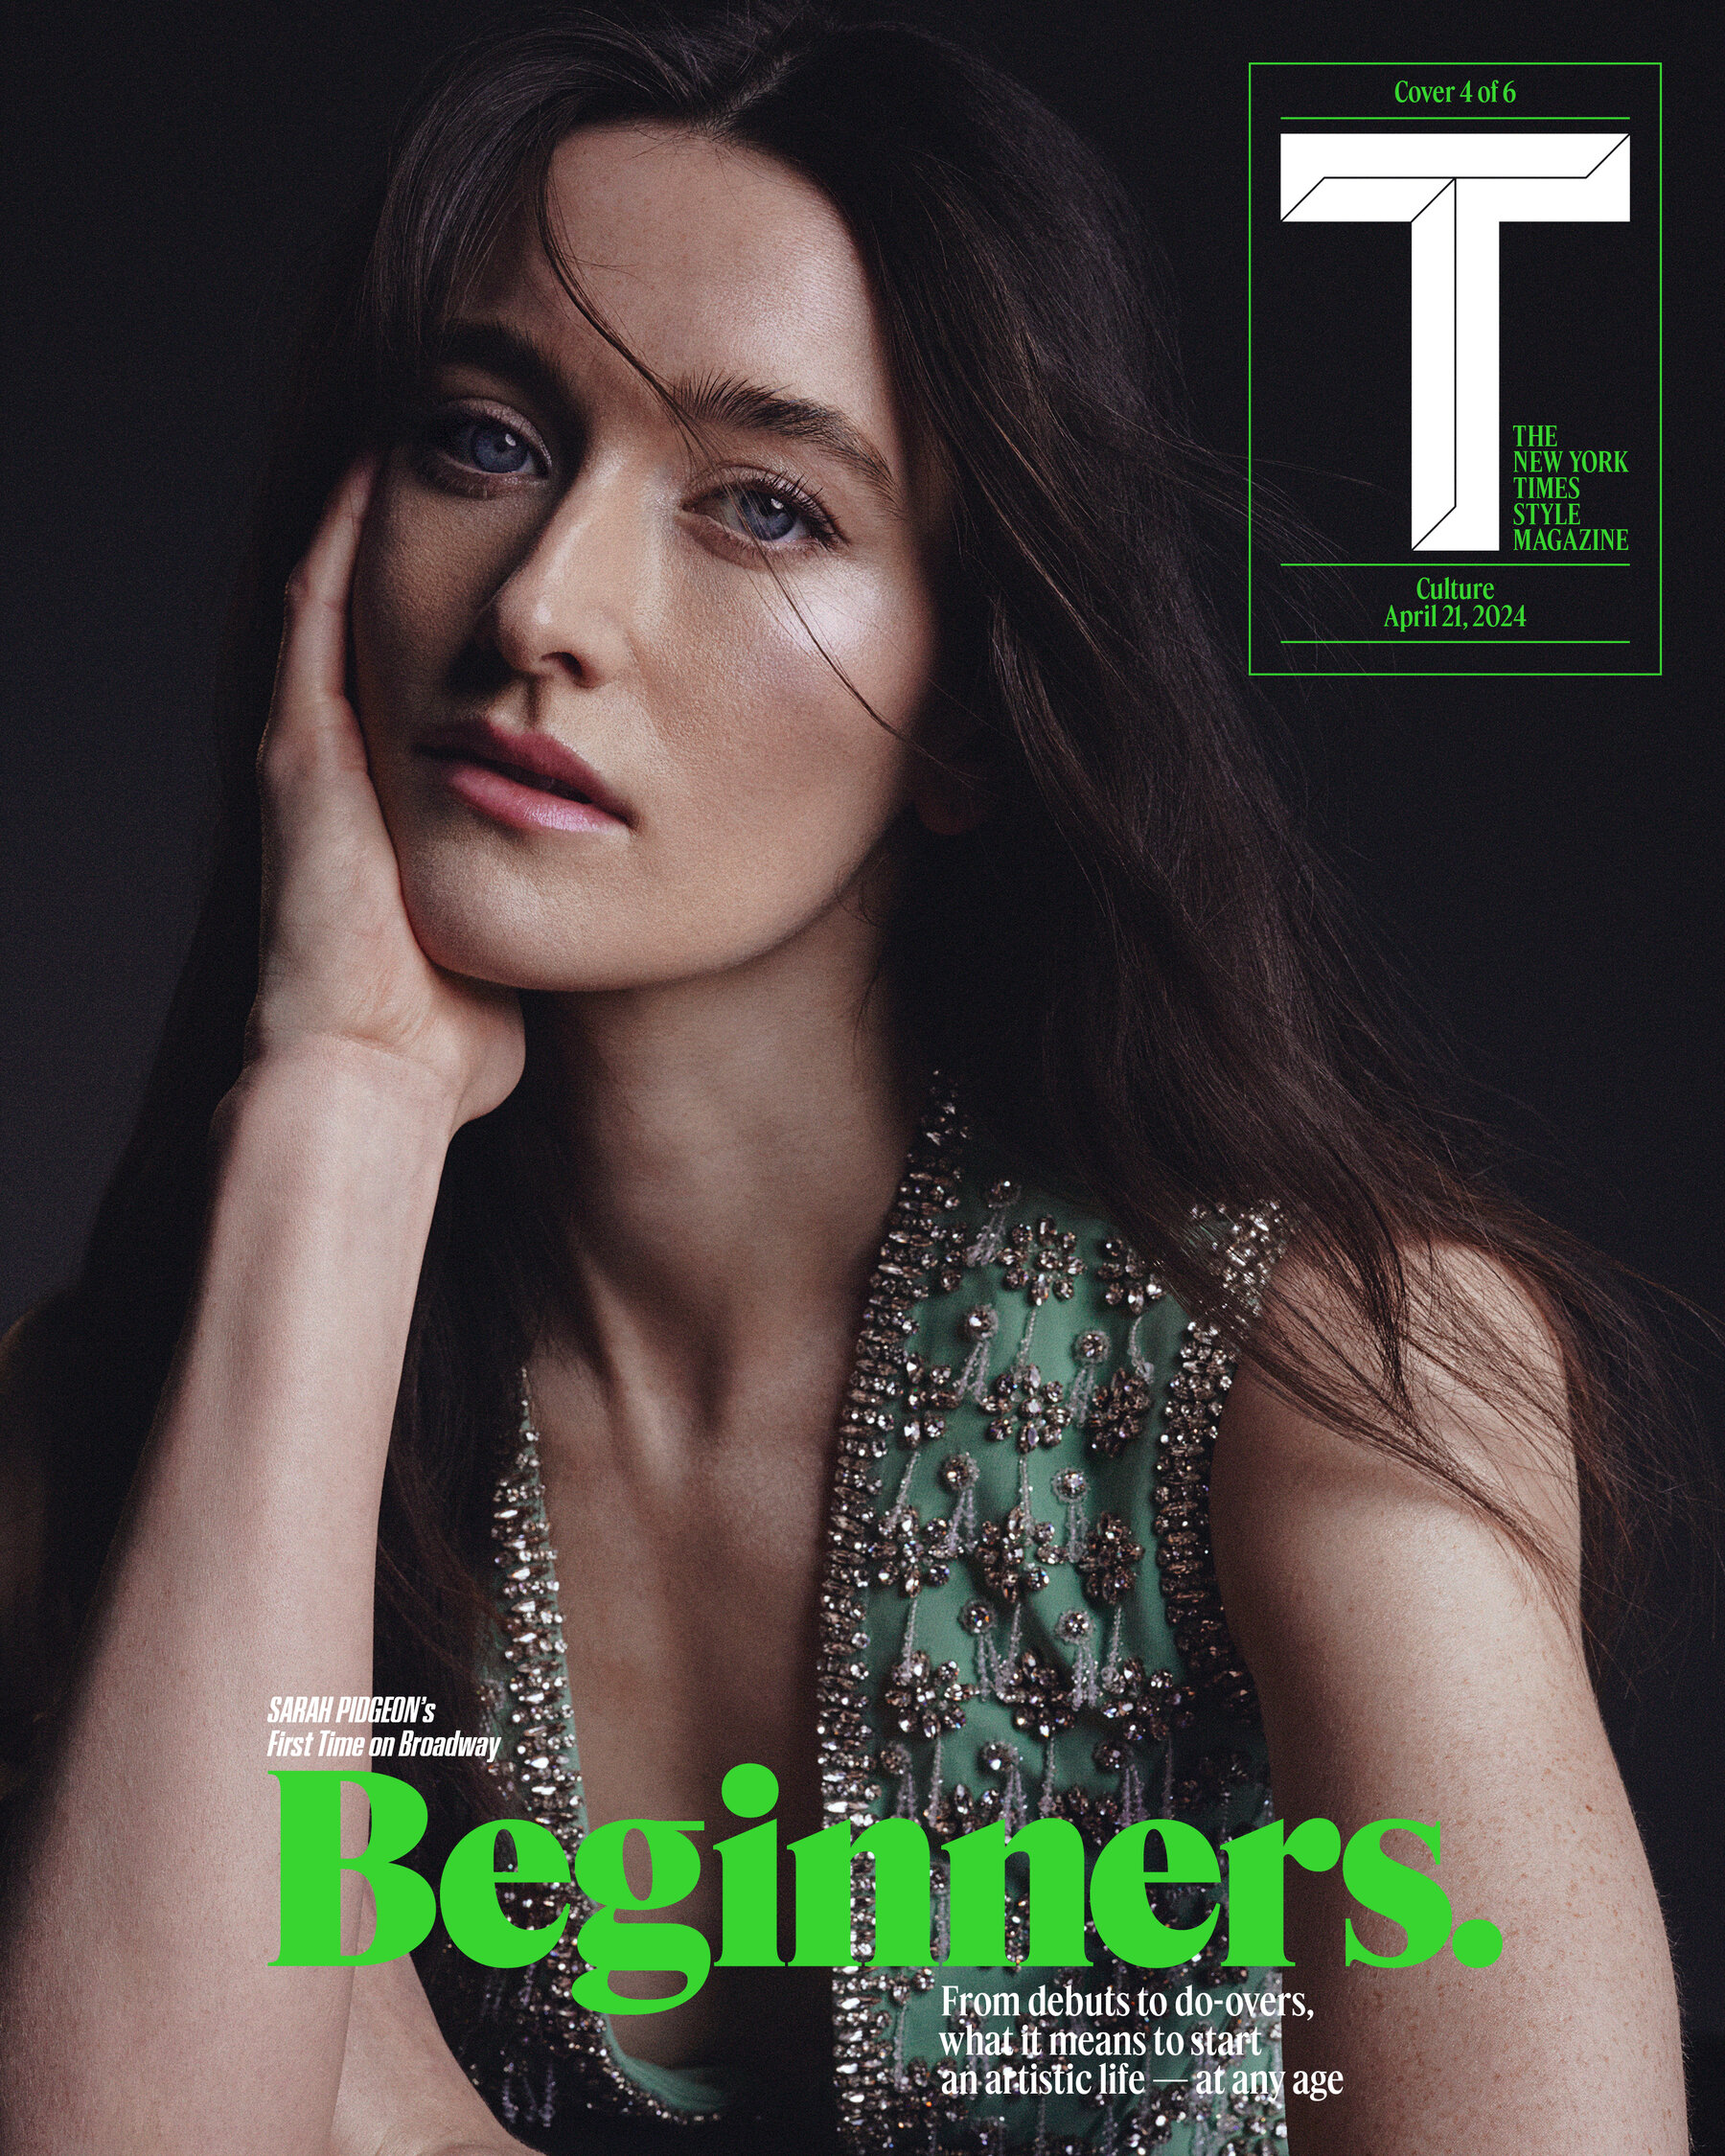 A cover of T: The New York Times Style Magazine's April 21, 2024 Culture issue, with the heading "Beginners. From debuts to do-overs, what it means to start an artistic life — at any age." The cover is a portrait of Sarah Pidgeon, looking at the camera, resting her right palm against her cheek.